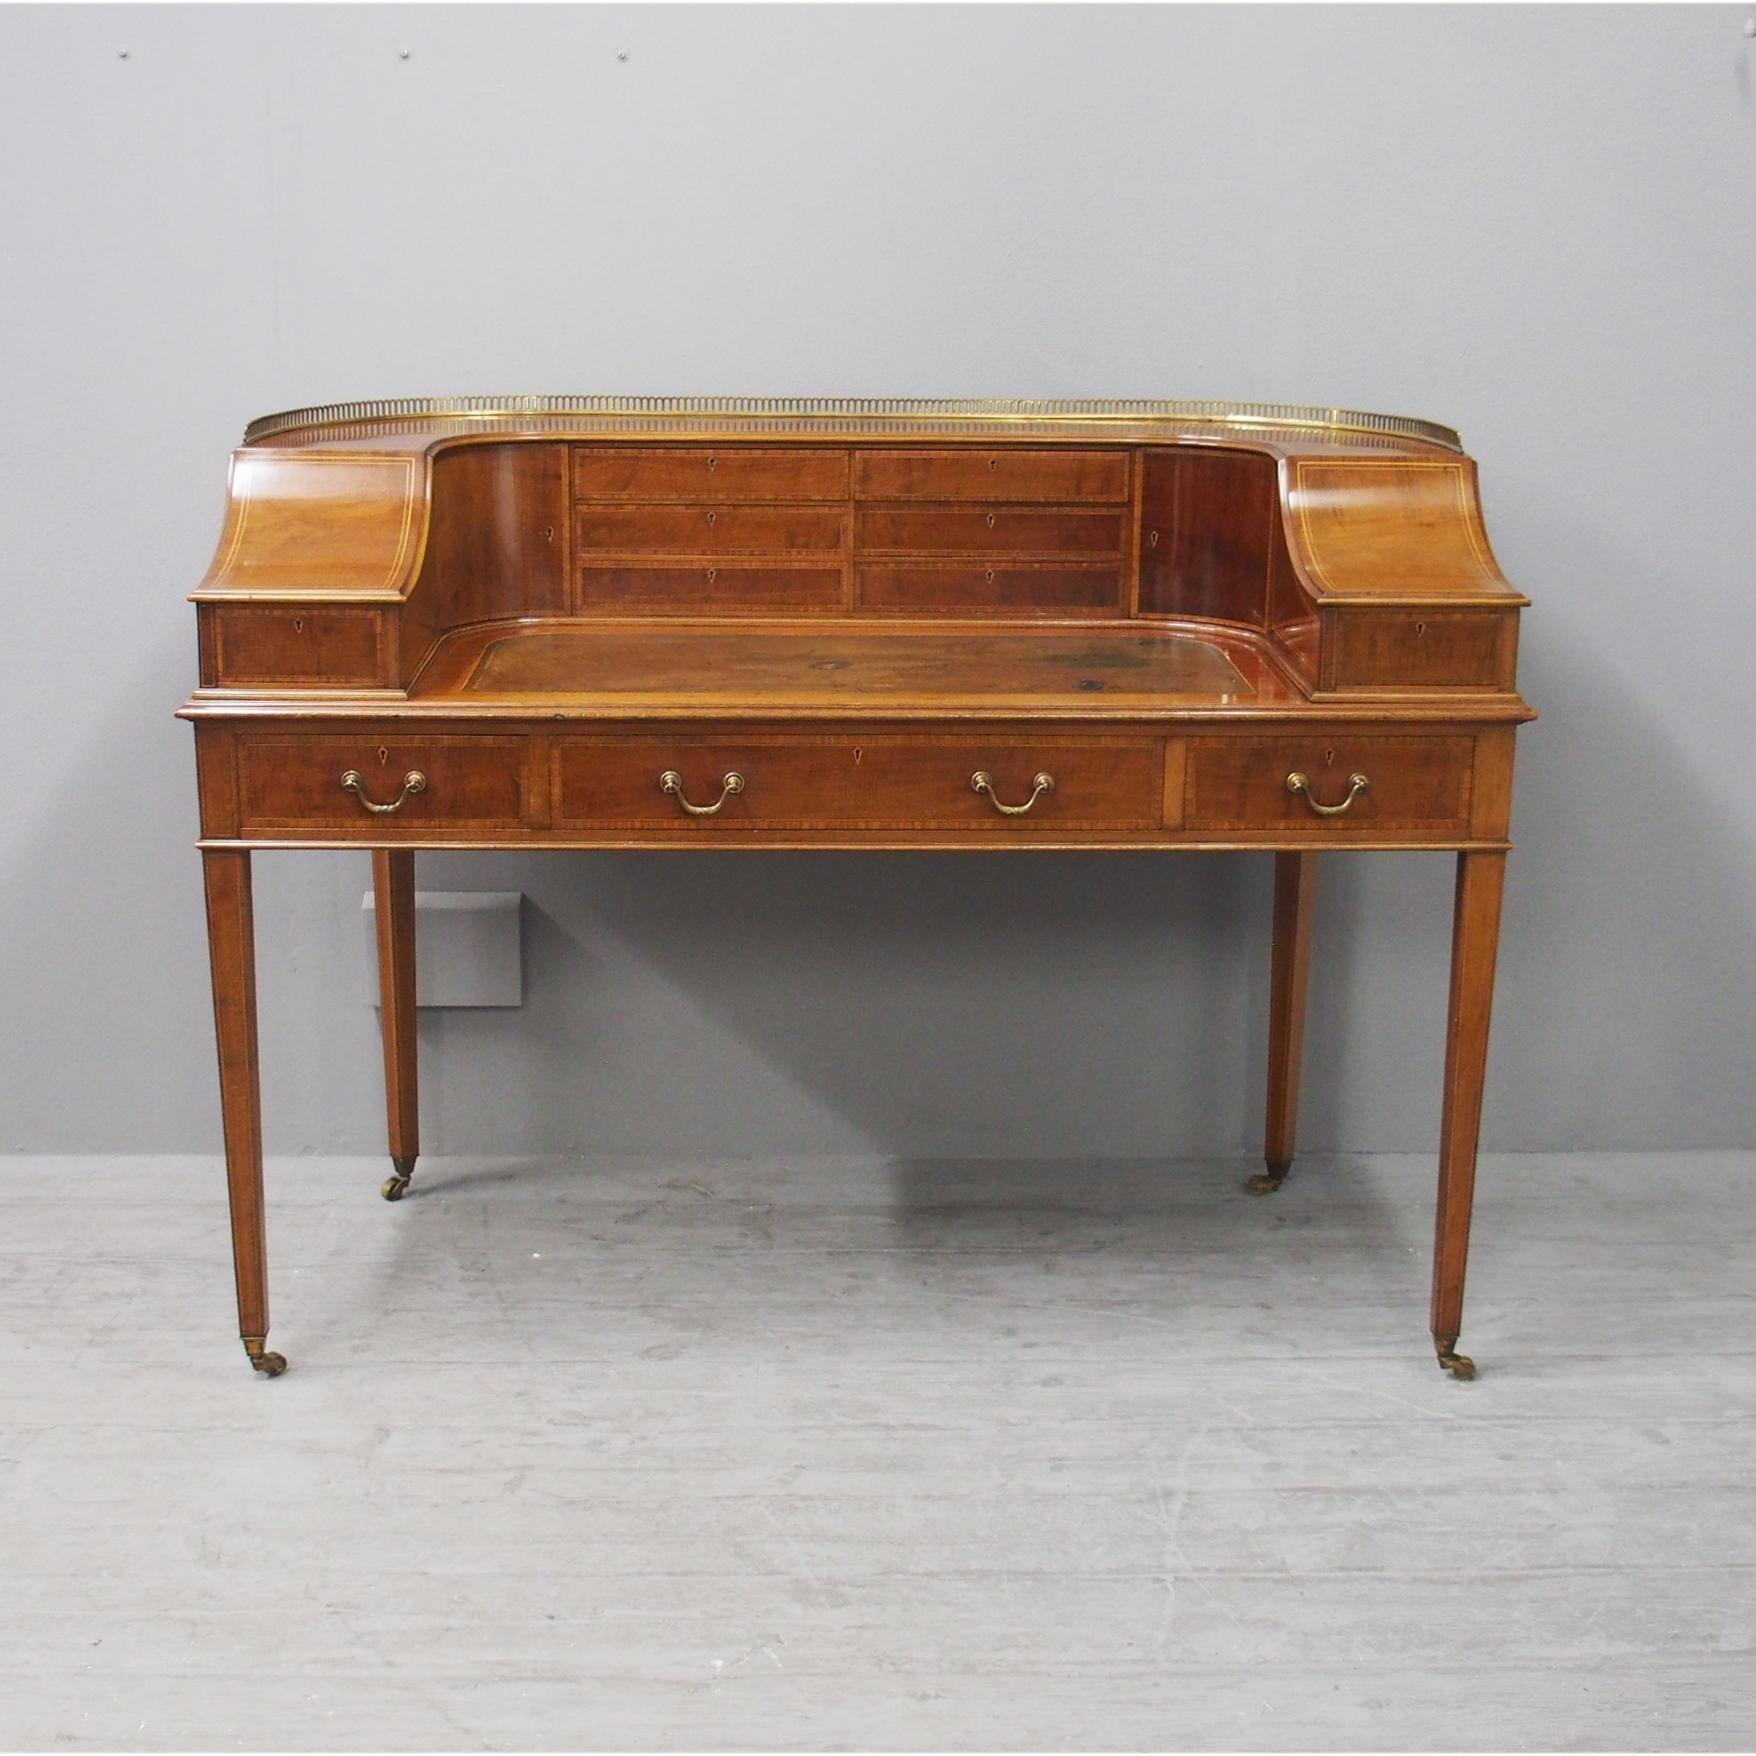 Mahogany and satinwood crossbanded Carlton House desk by Gillows of Lancaster, circa 1860. With open brass gallery to the top above a configuration of 8 drawers and 3 cupboards with satinwood inlay. There are a further set of 3 drawers below this,